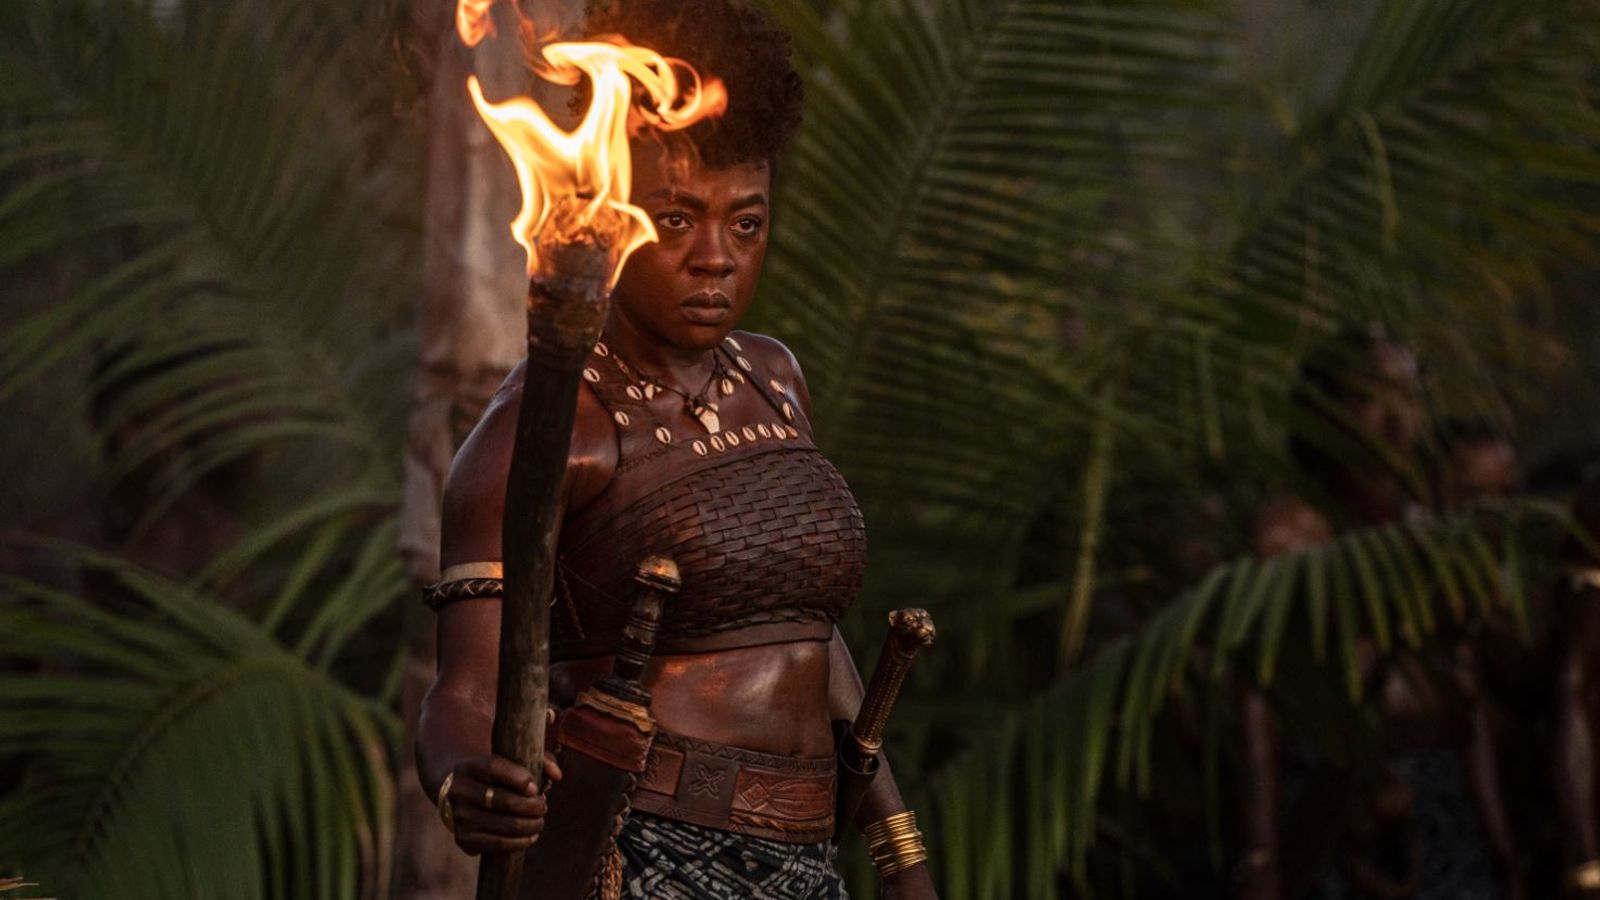 Viola Davis on pushing for bold roles and The Woman King being her 'magnus opus'